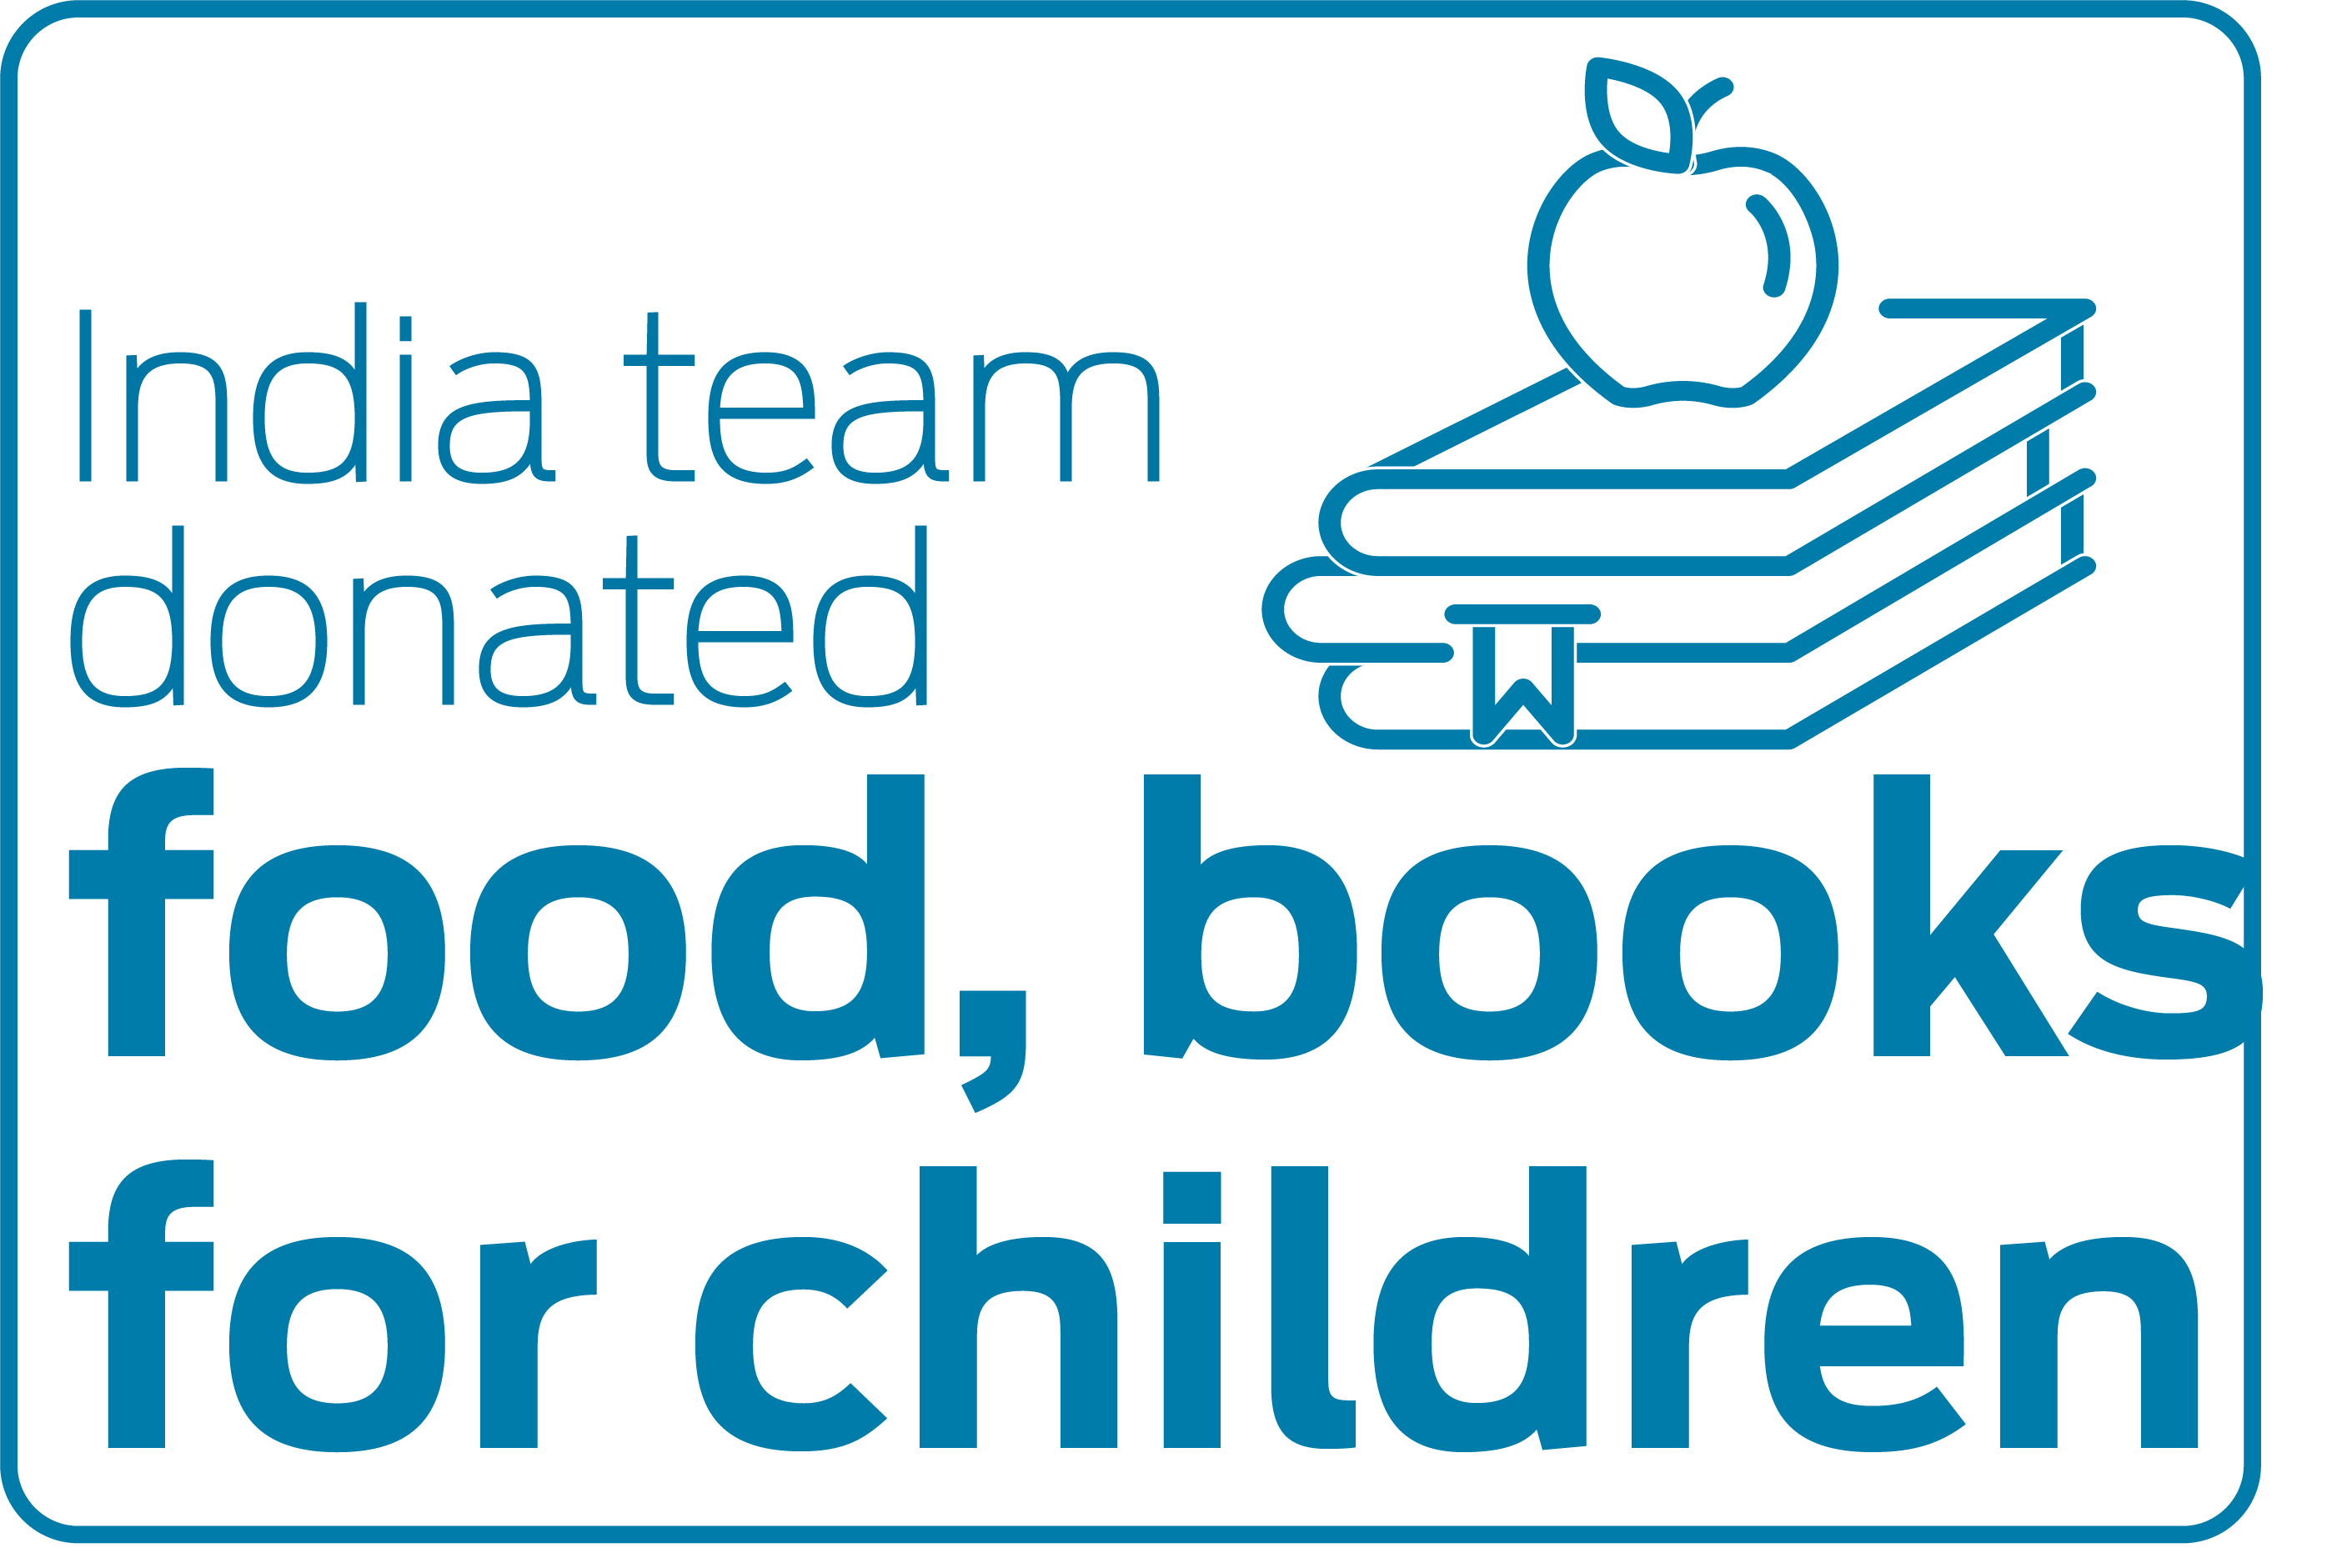 India team donated food, books for children